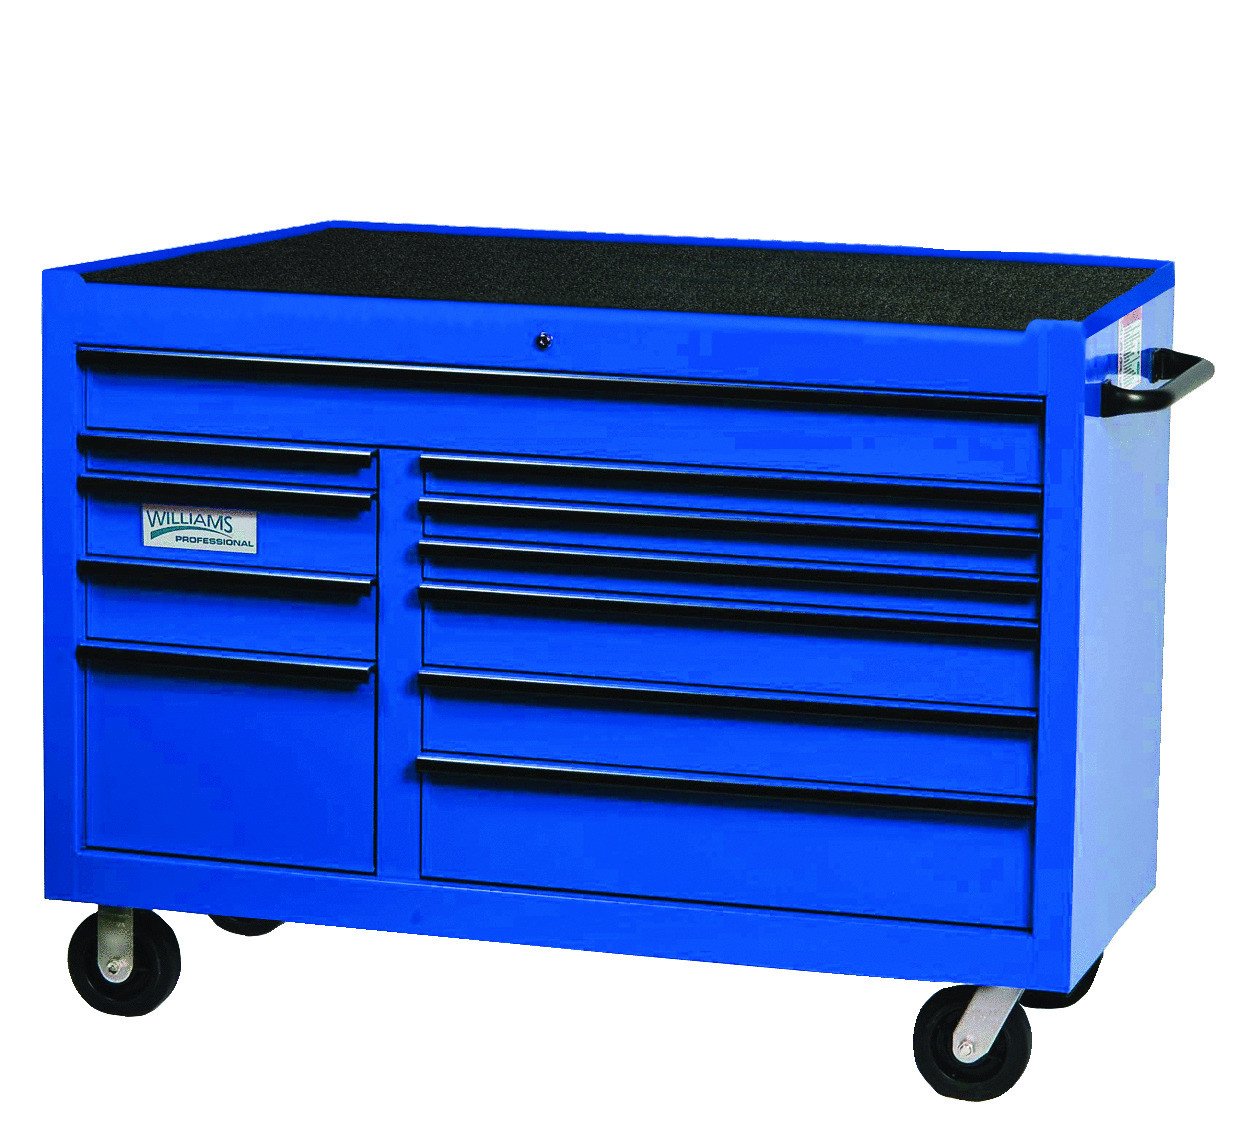 https://product-images.experro.app/s-613cgdga/products/8364/images/38537/williams-55-williams-roller-cabinet-11-drawer-blue-w55rc11bl__27489.1676501189.1280.1280.jpg?c=2